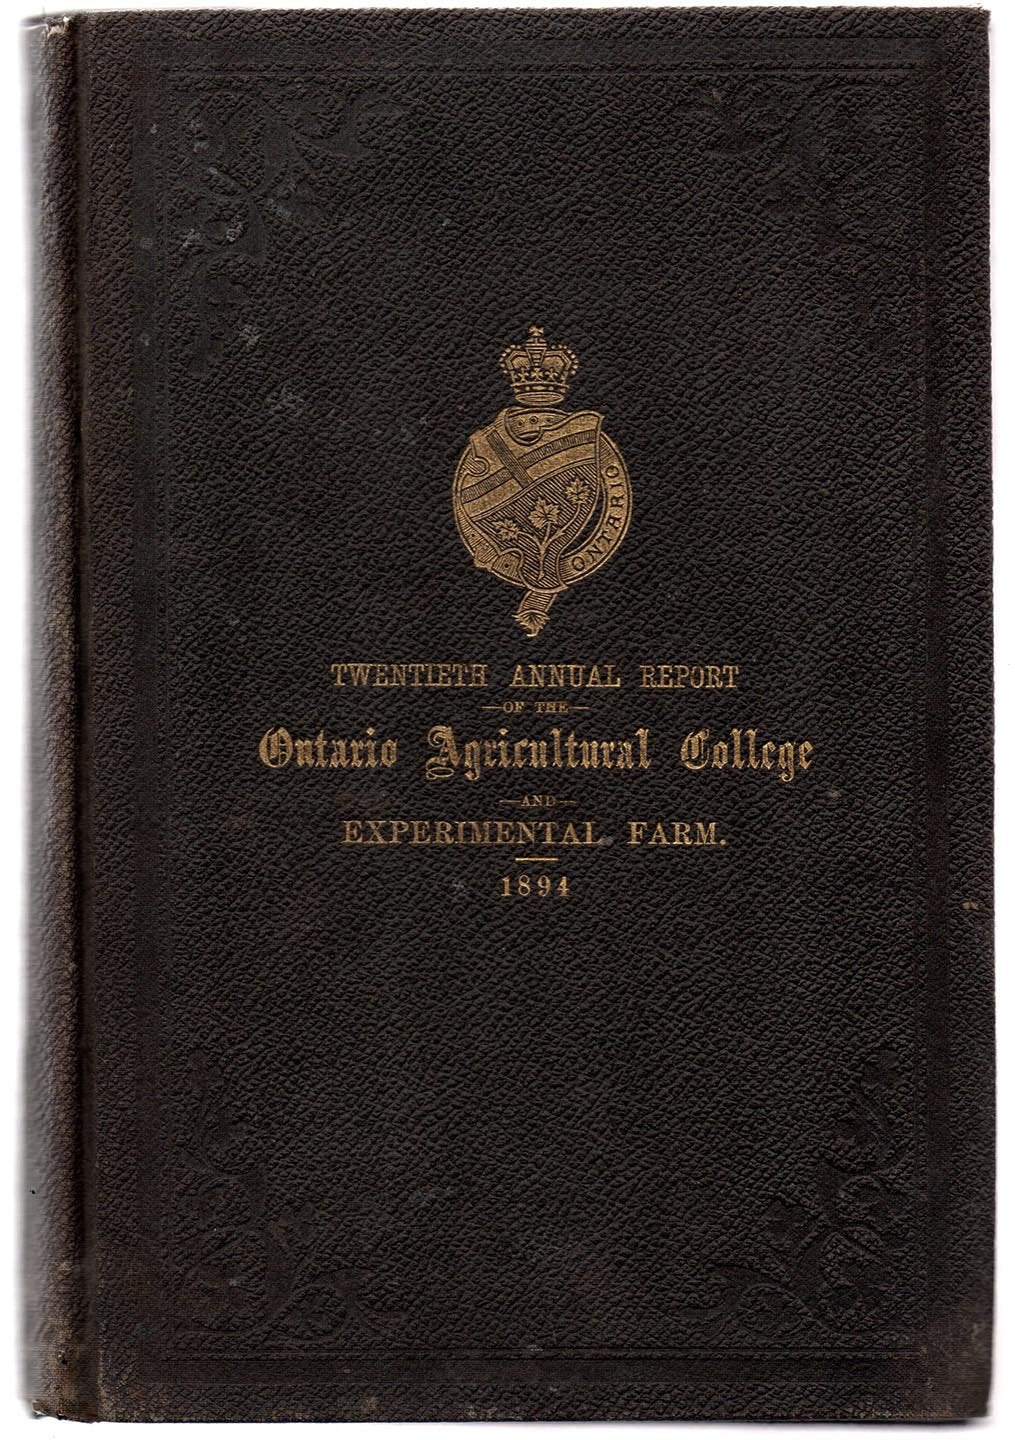 Twentieth Annual Report of the Ontario Agricultural College and Experimental Farm; Sixteenth Annual Report of the Agricultural and Experimental Union 1894